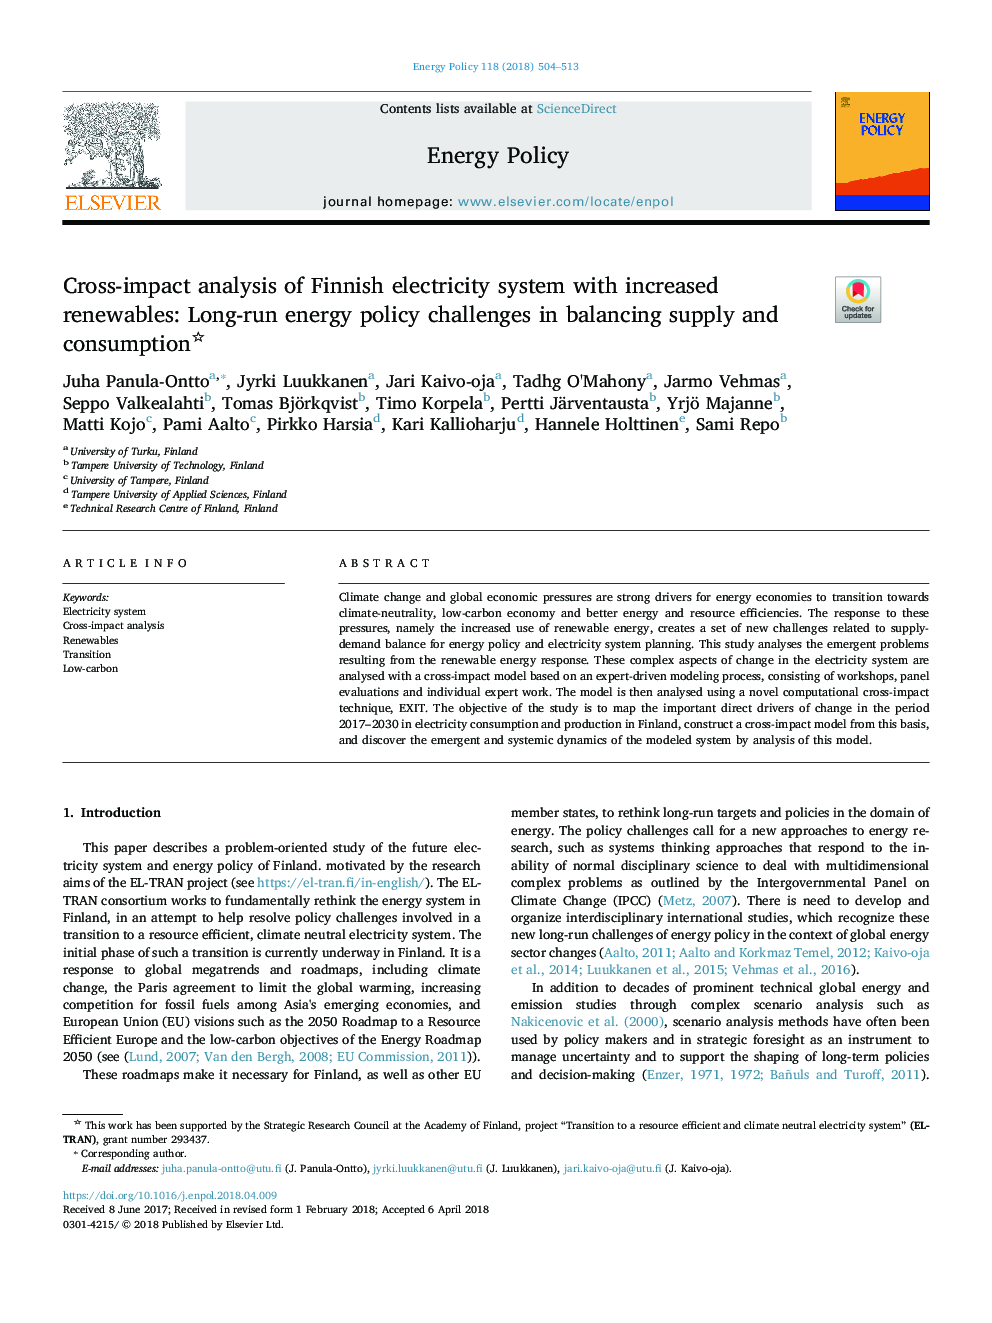 Cross-impact analysis of Finnish electricity system with increased renewables: Long-run energy policy challenges in balancing supply and consumption